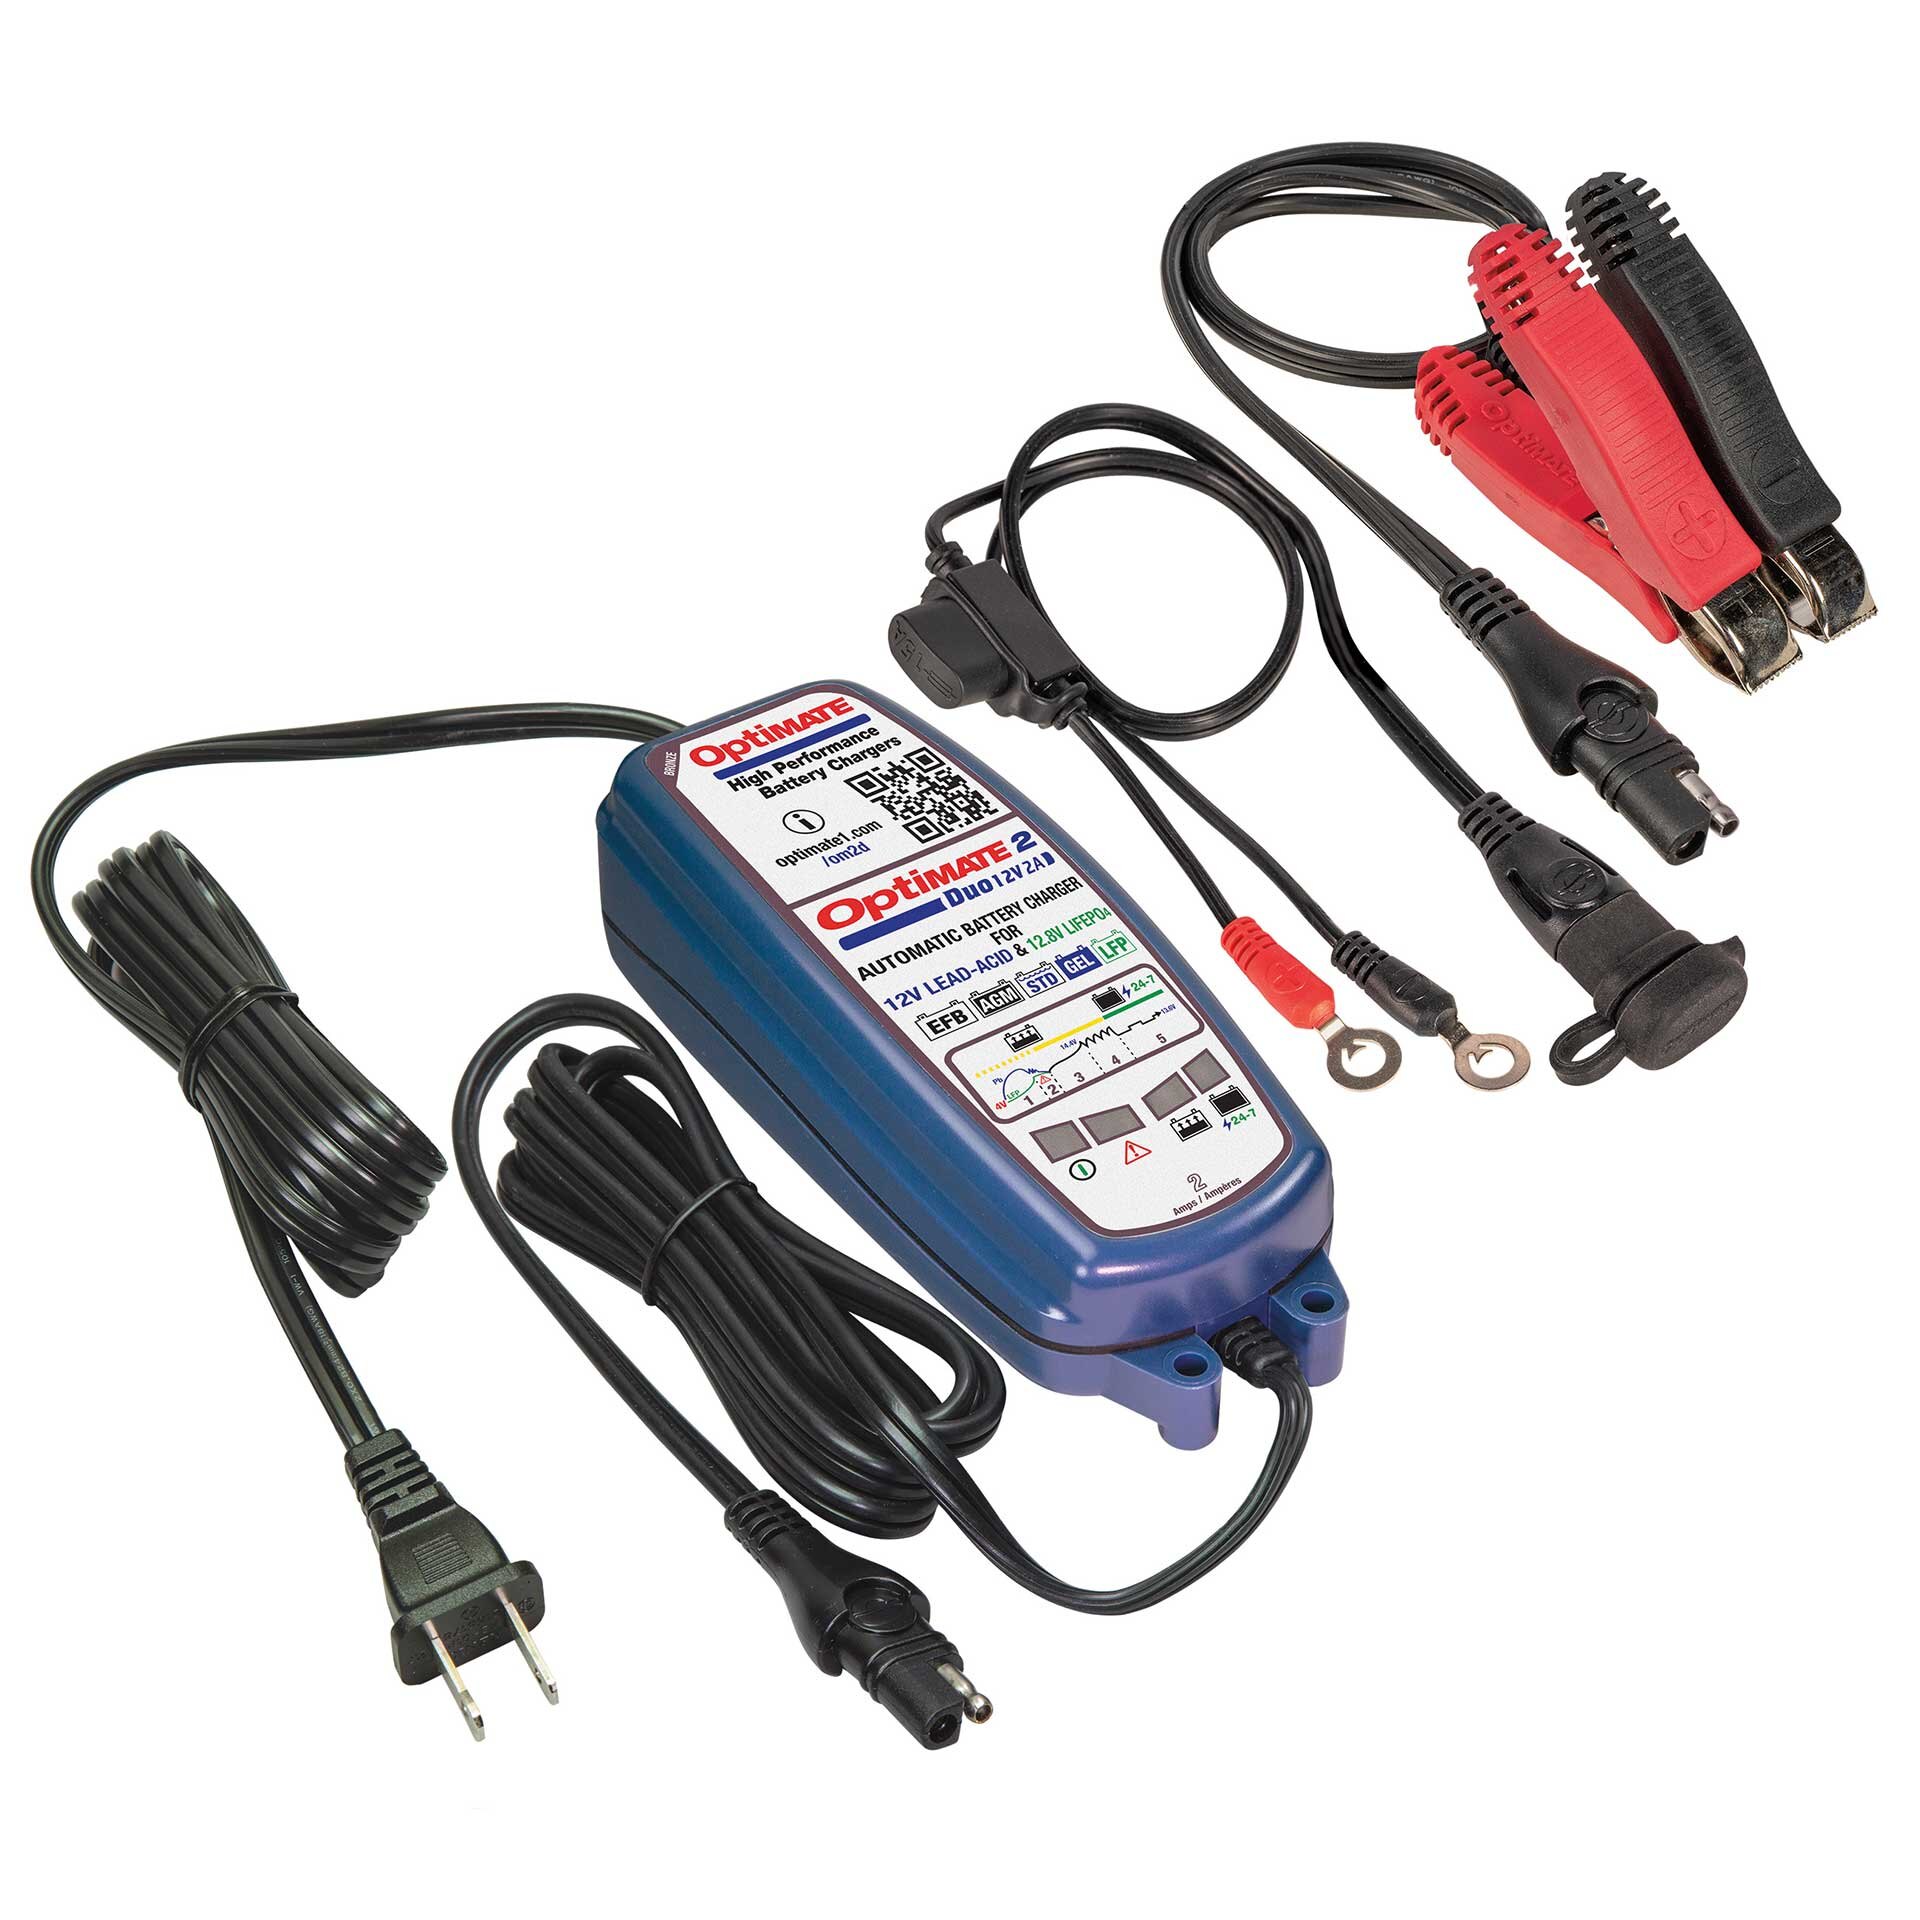 OptiMATE 2 Duo Battery Charger